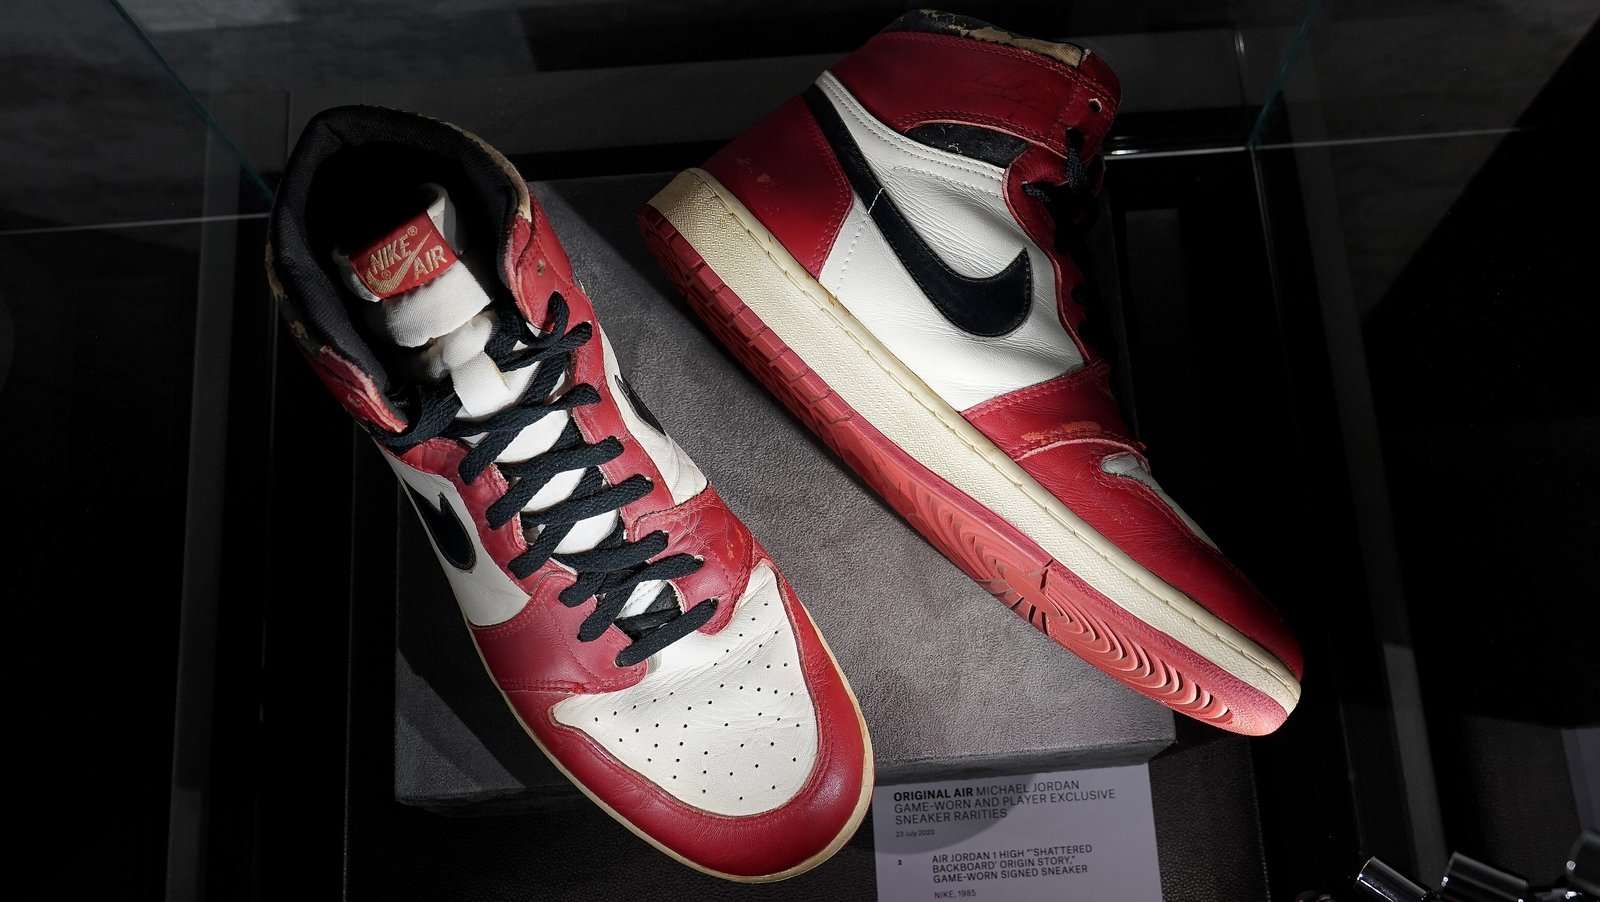 Michael Jordan sneakers sell for $615,000 at auction